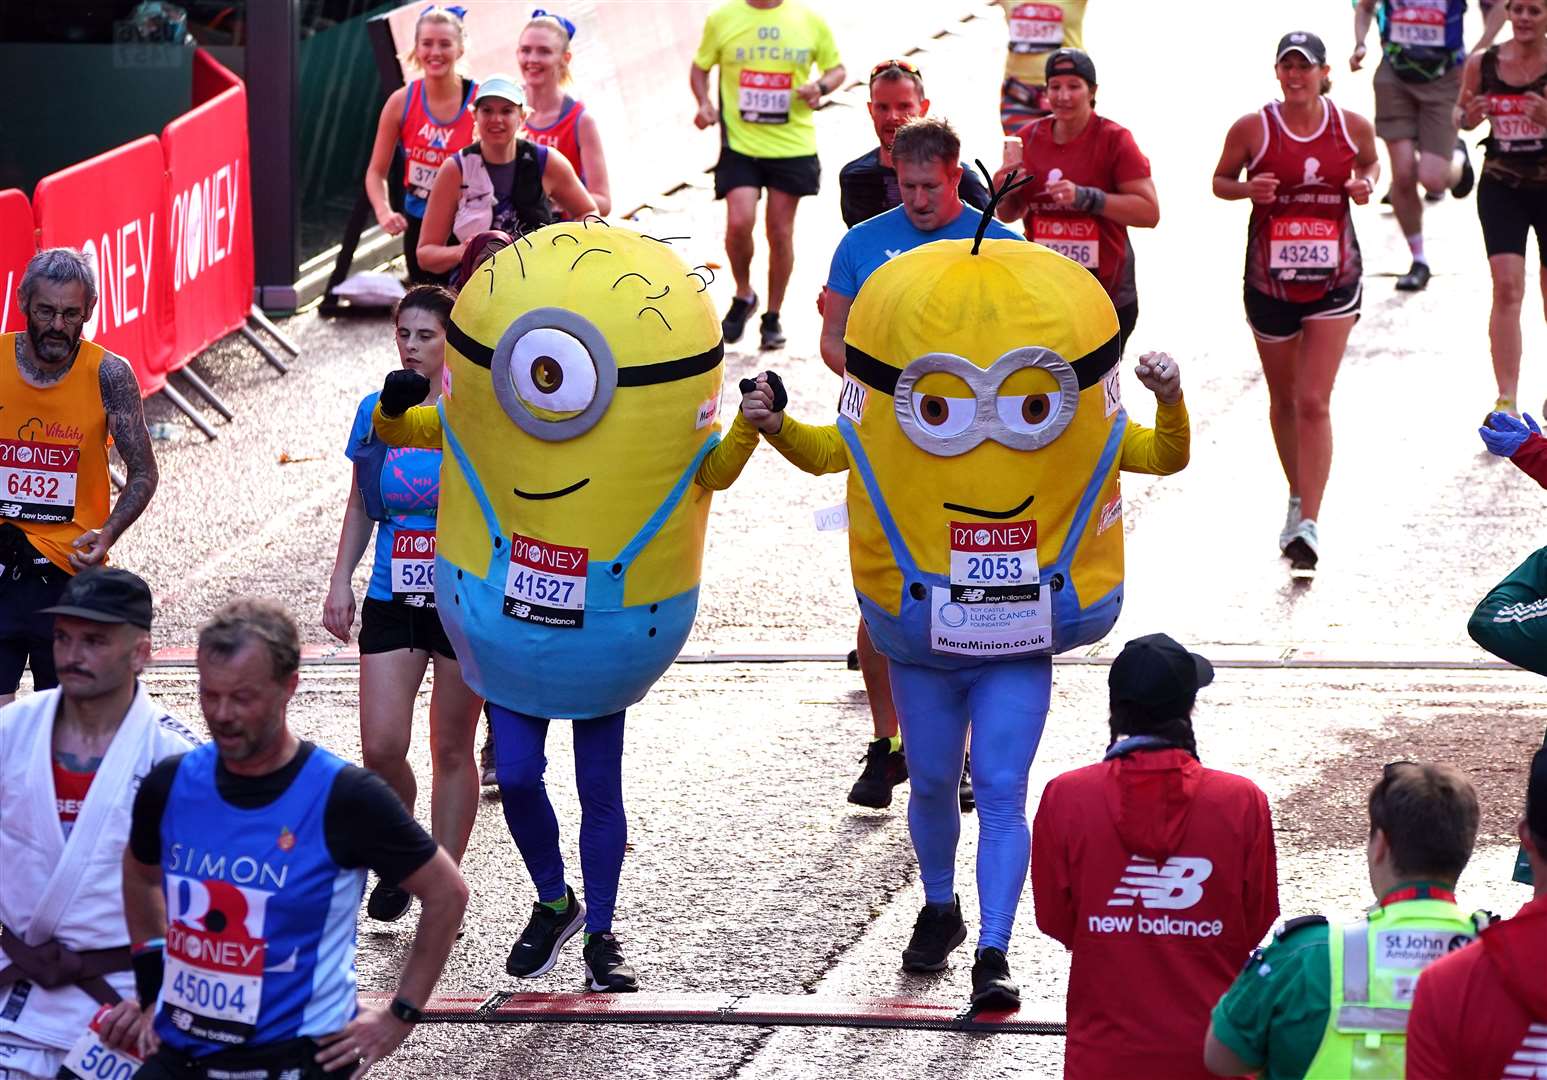 The fancy dress costumes worn by runners are one of the highlights for London Marathon spectators (PA)